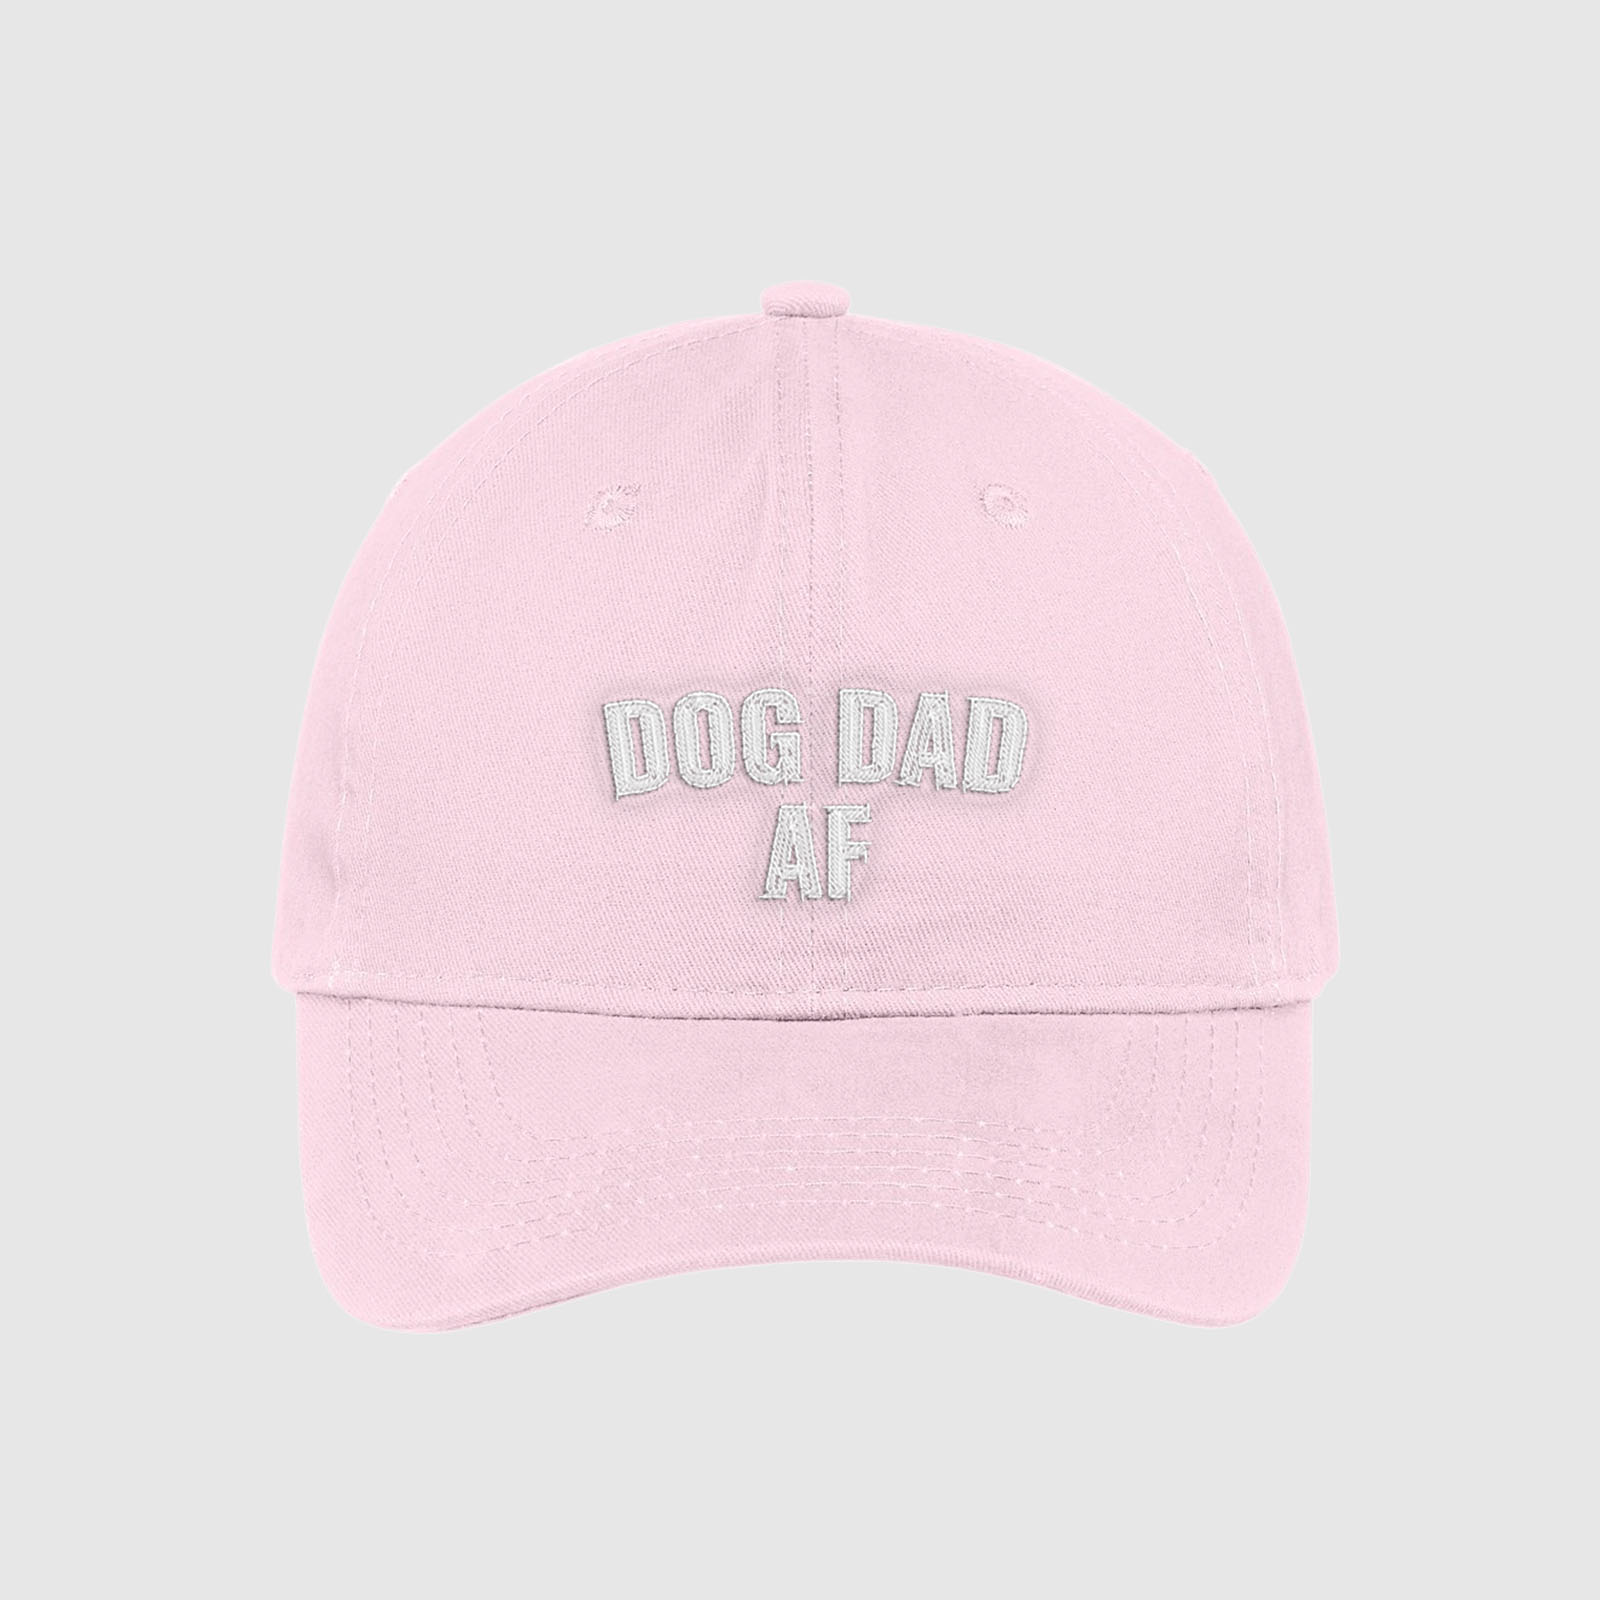 Blush pink Dog Dad AF Hat embroidered with white text